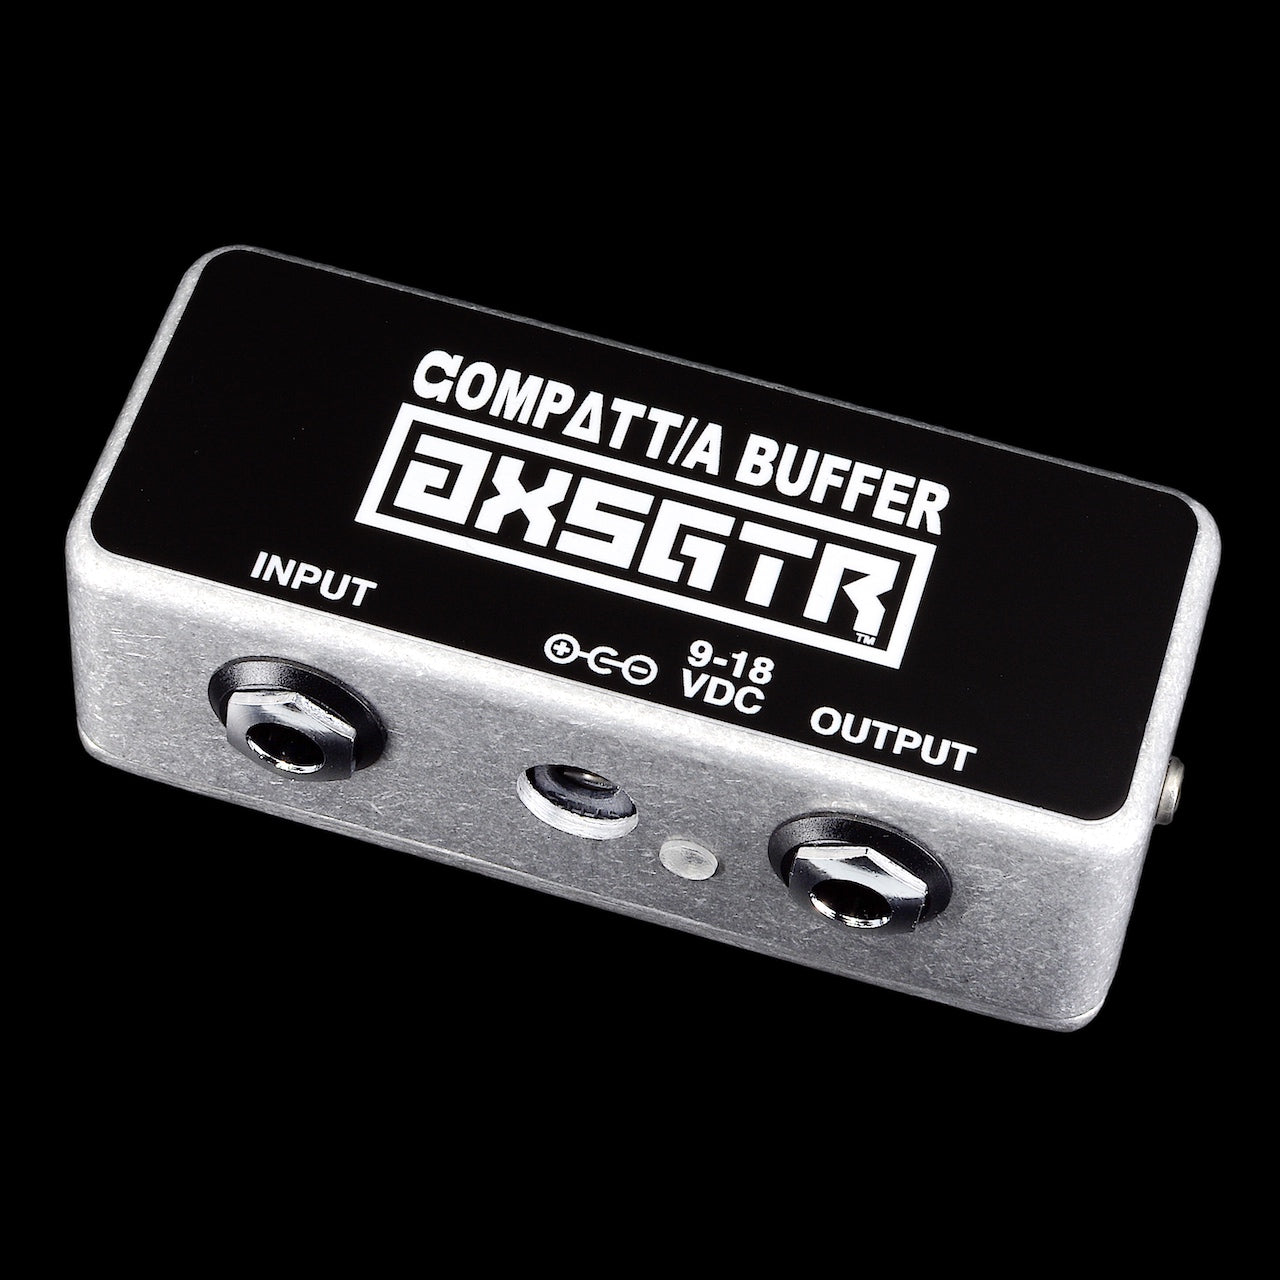 axsgtr axess electronics cpta compatta guitar input buffer black angled right side